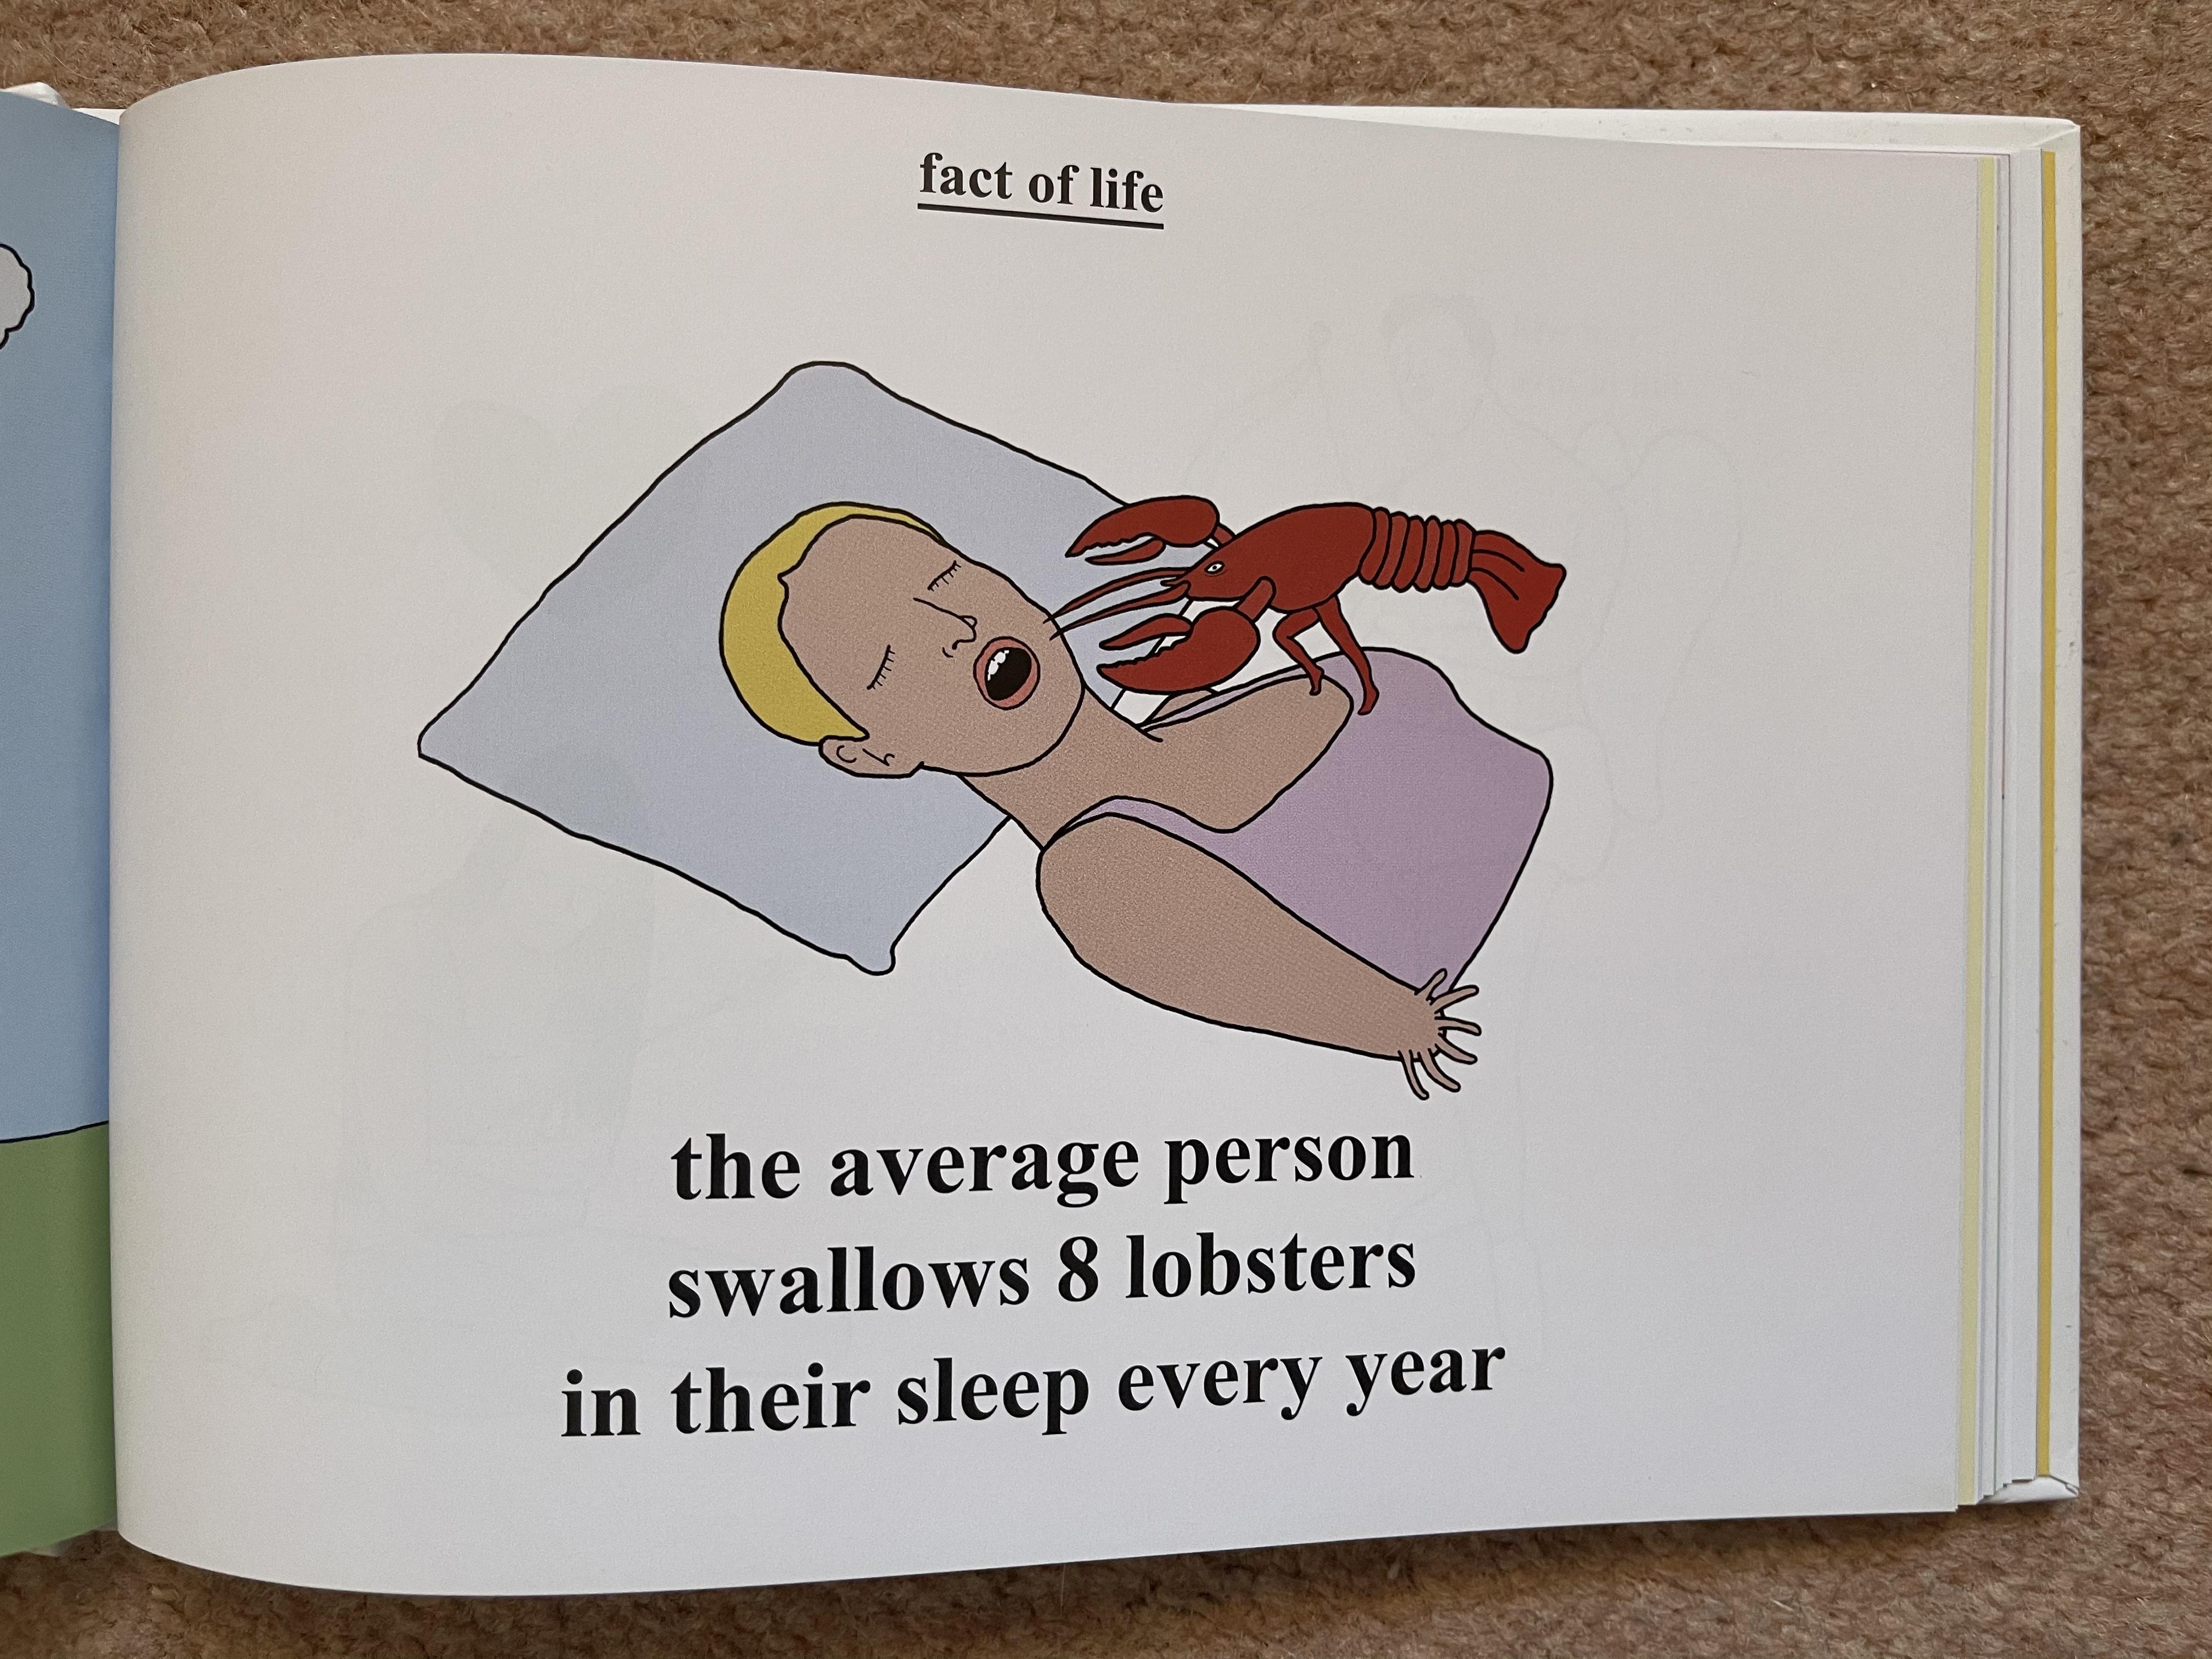 You can never escape the crustaceans.